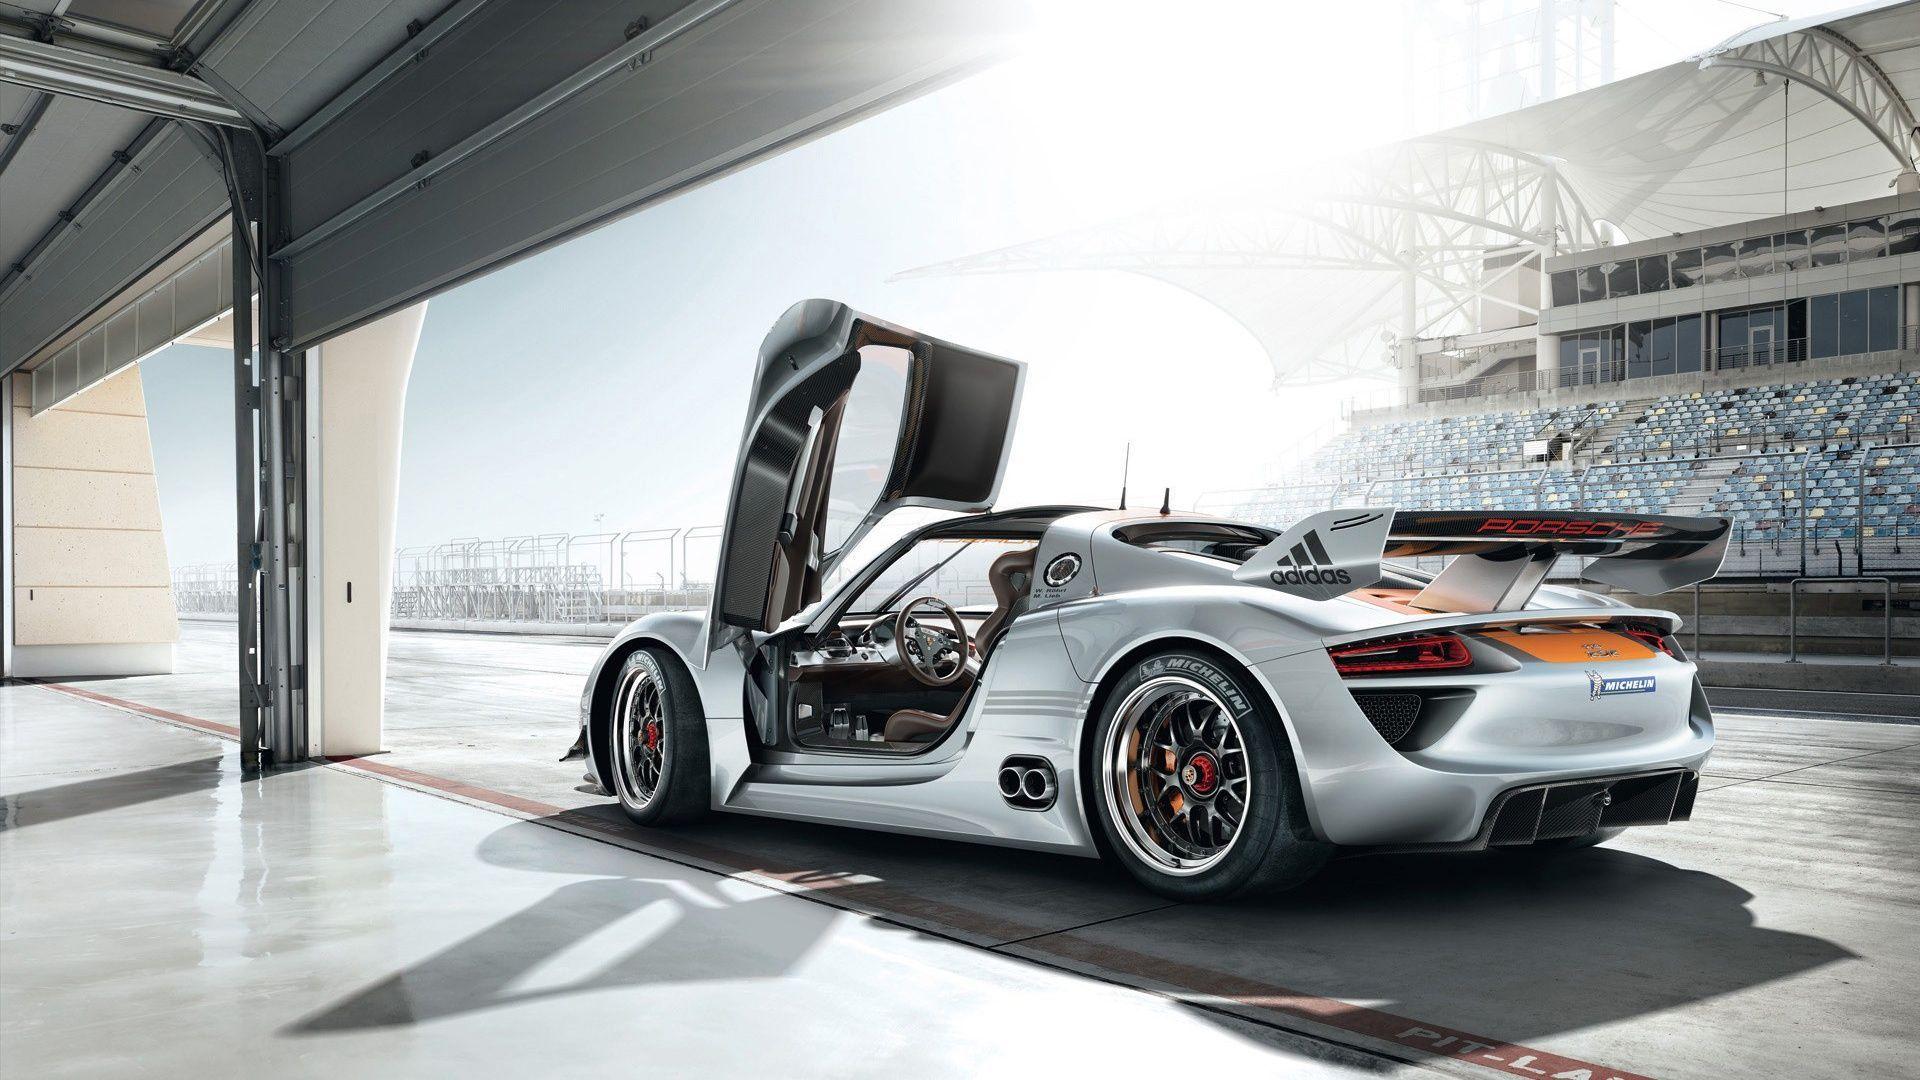 Wallpaper HD 1080p Cars Gallery (85 Plus) PIC WPW2014918